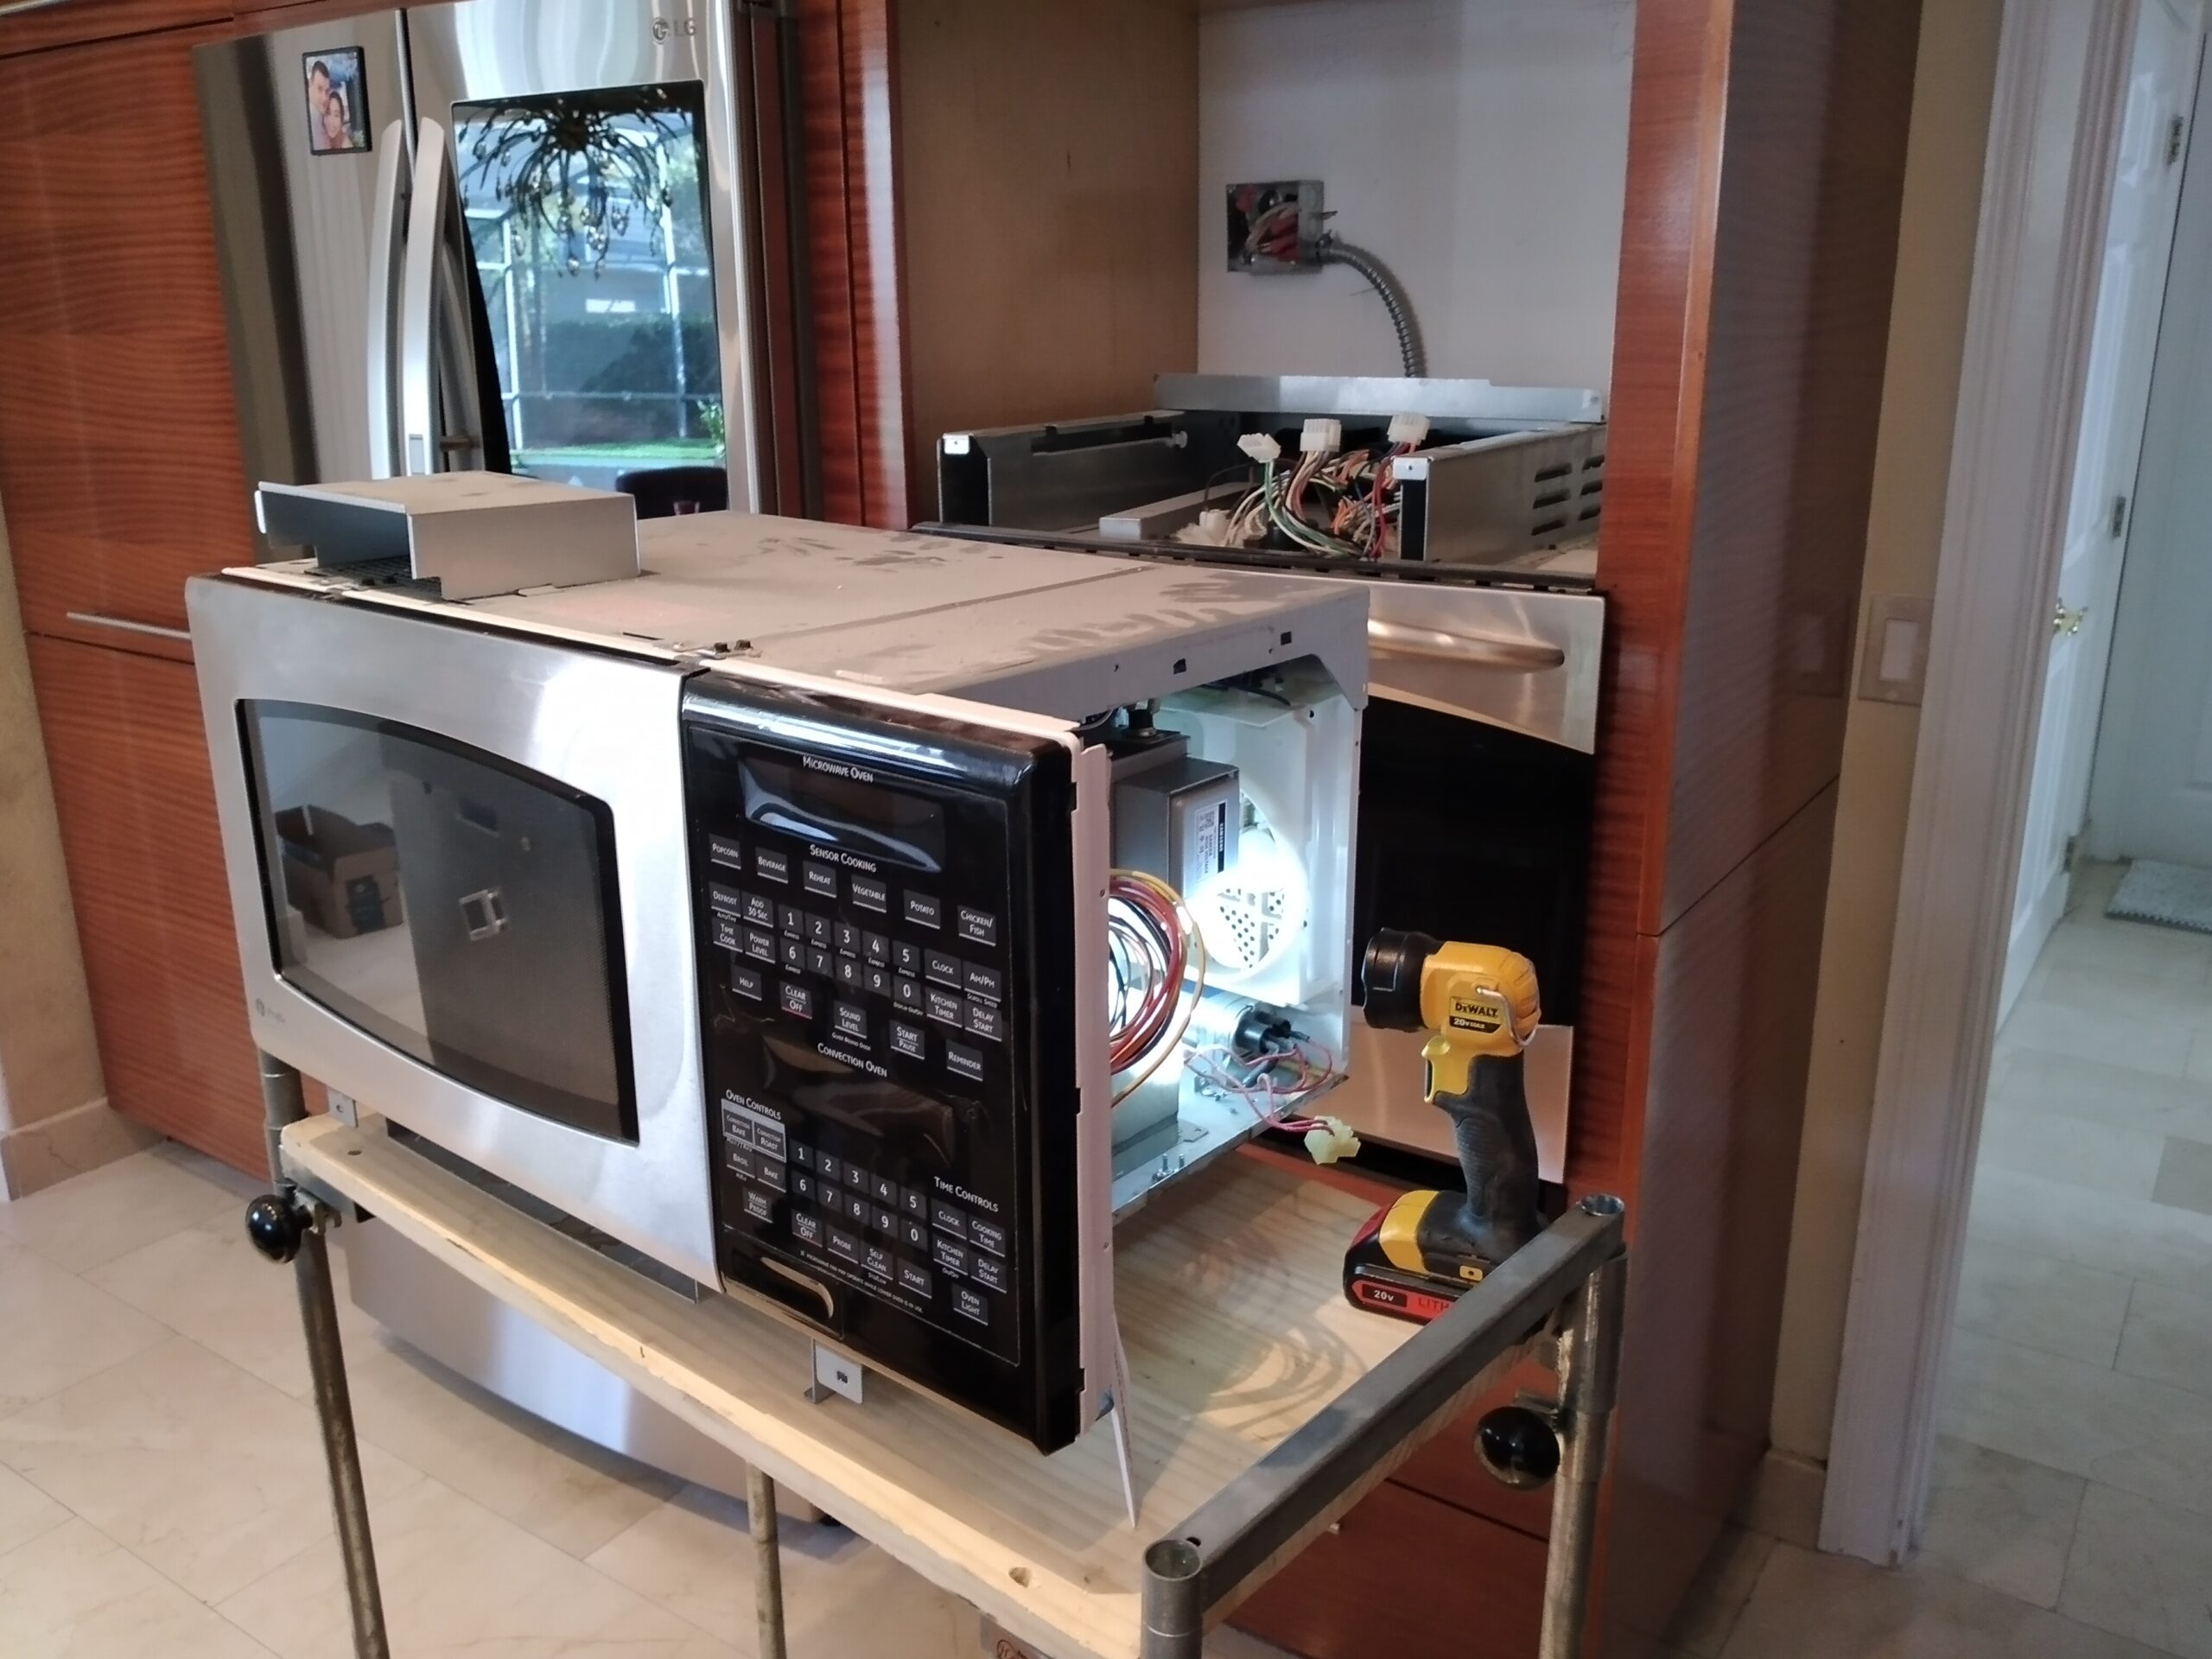 appliance repair microwave repair replaced bad magnetron dallas ave bellview fl 32526